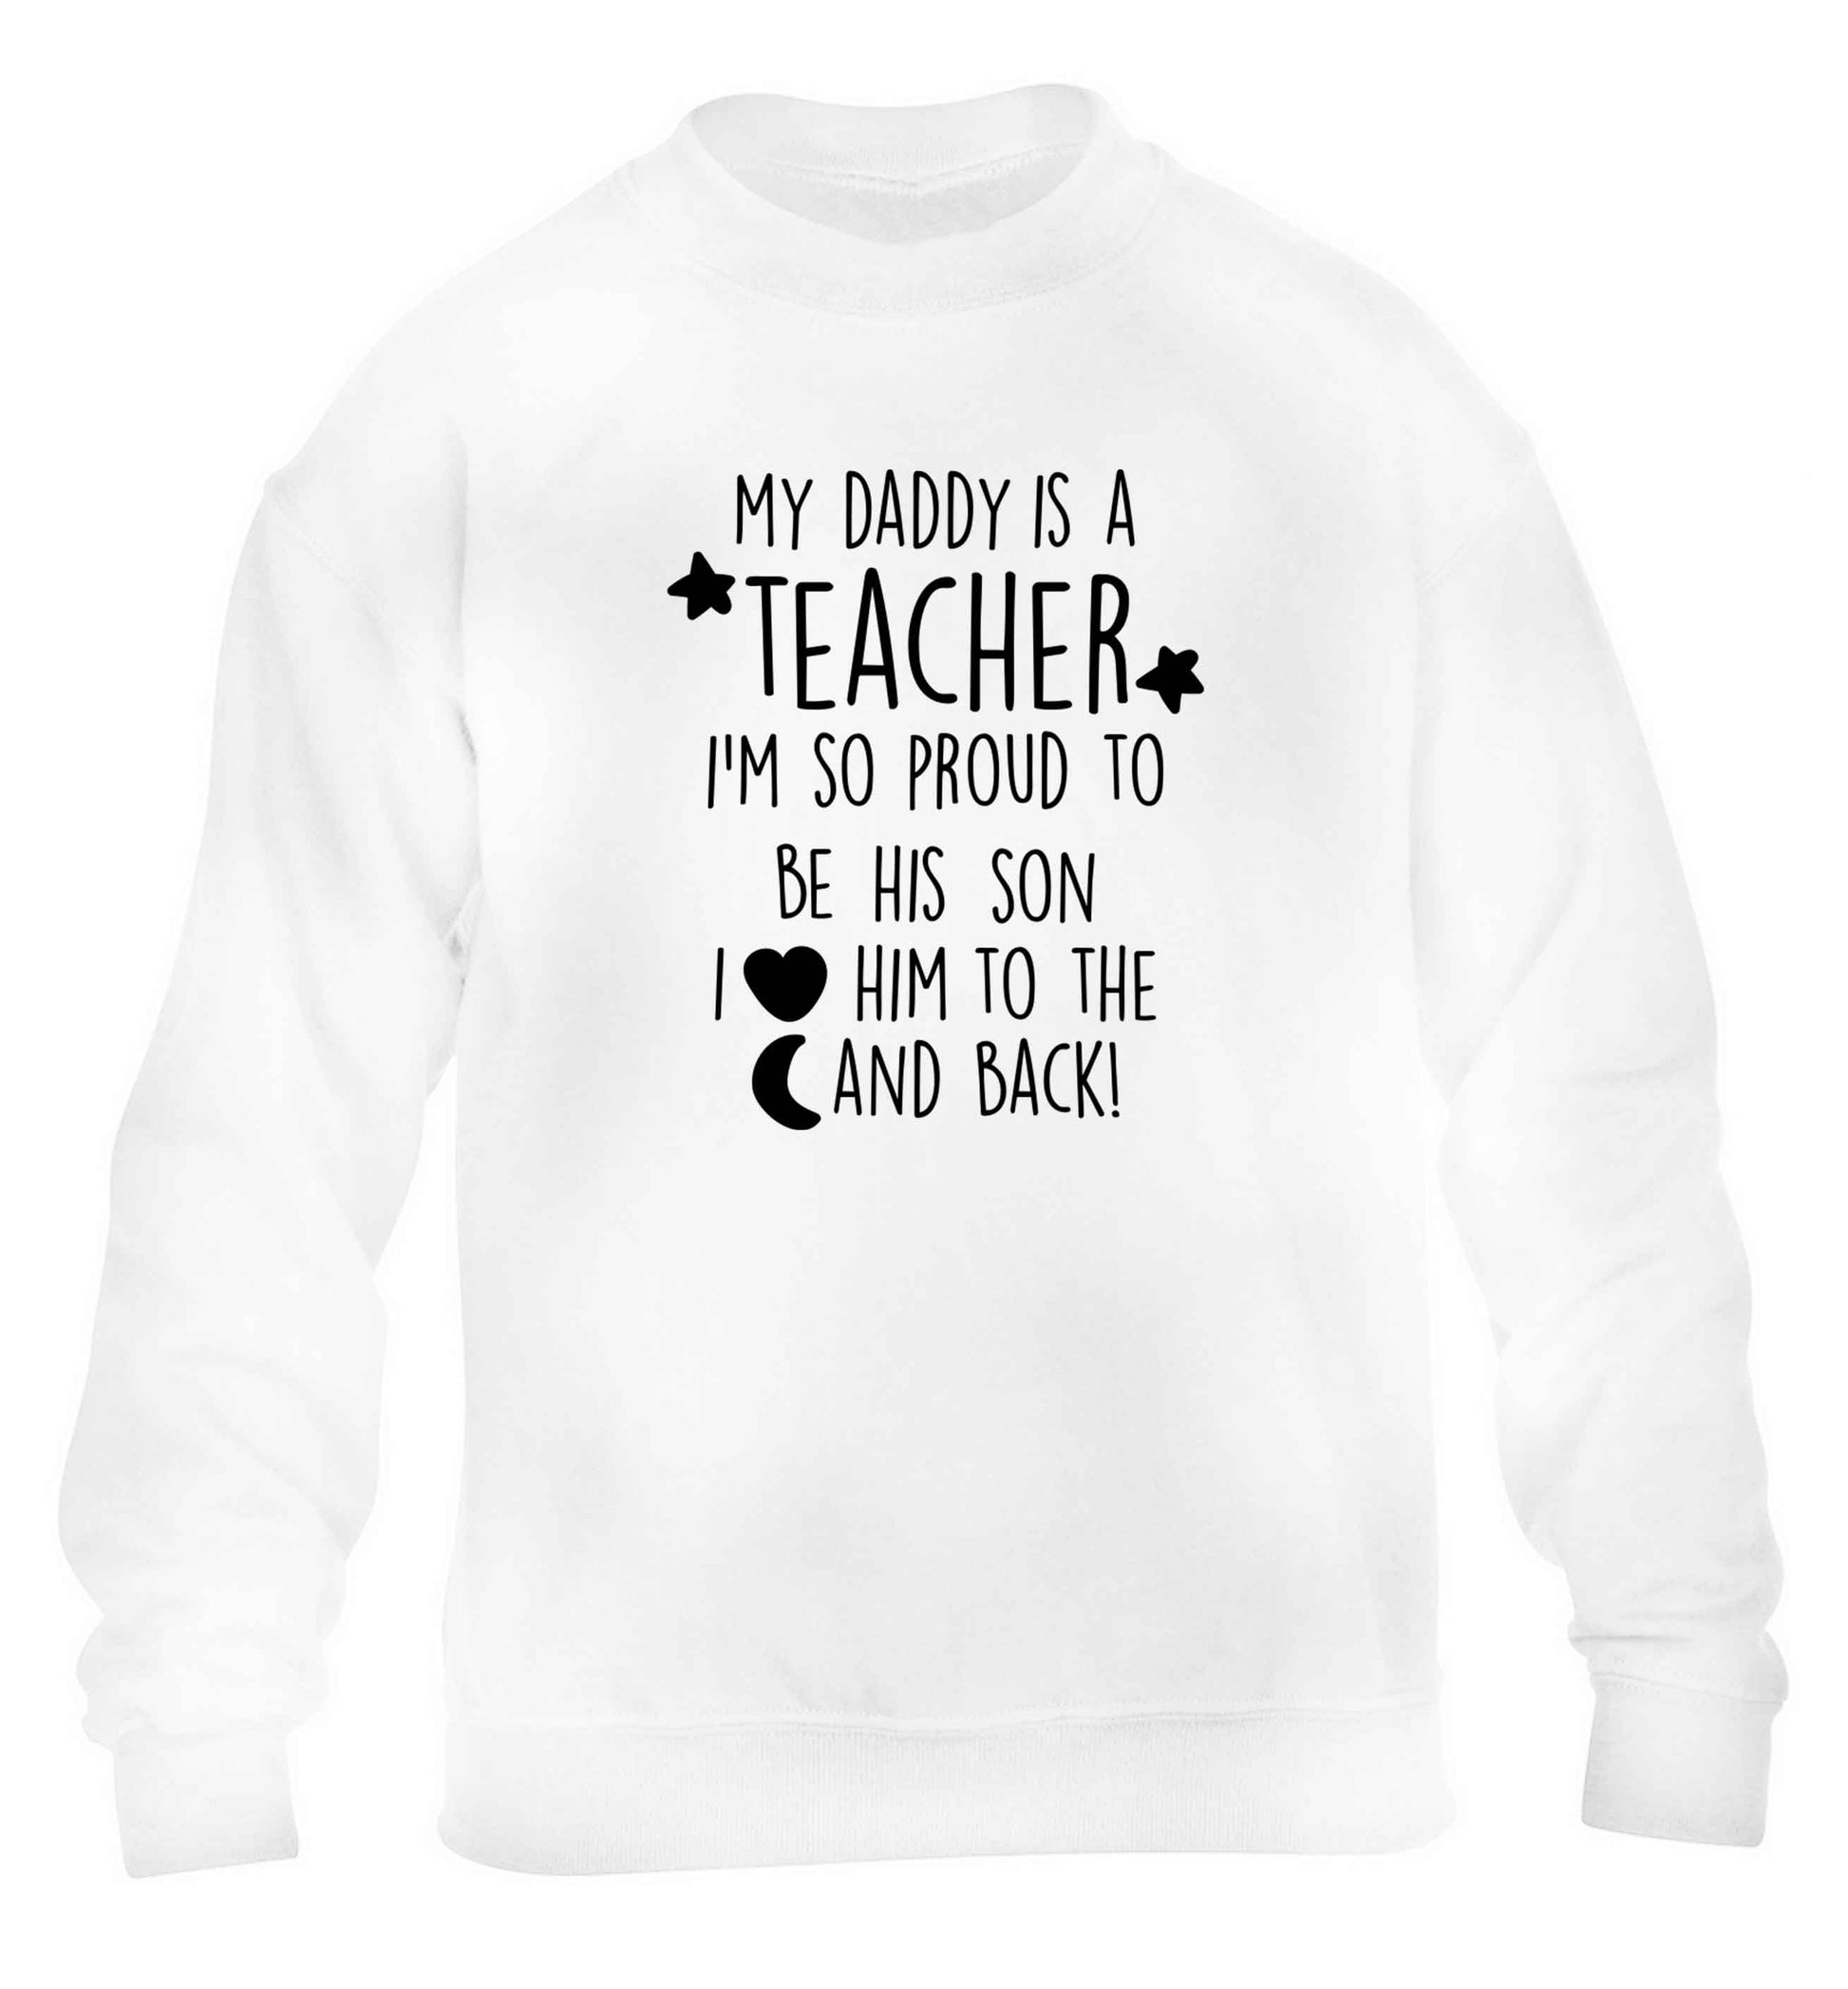 My daddy is a teacher I'm so proud to be his son I love her to the moon and back children's white sweater 12-13 Years